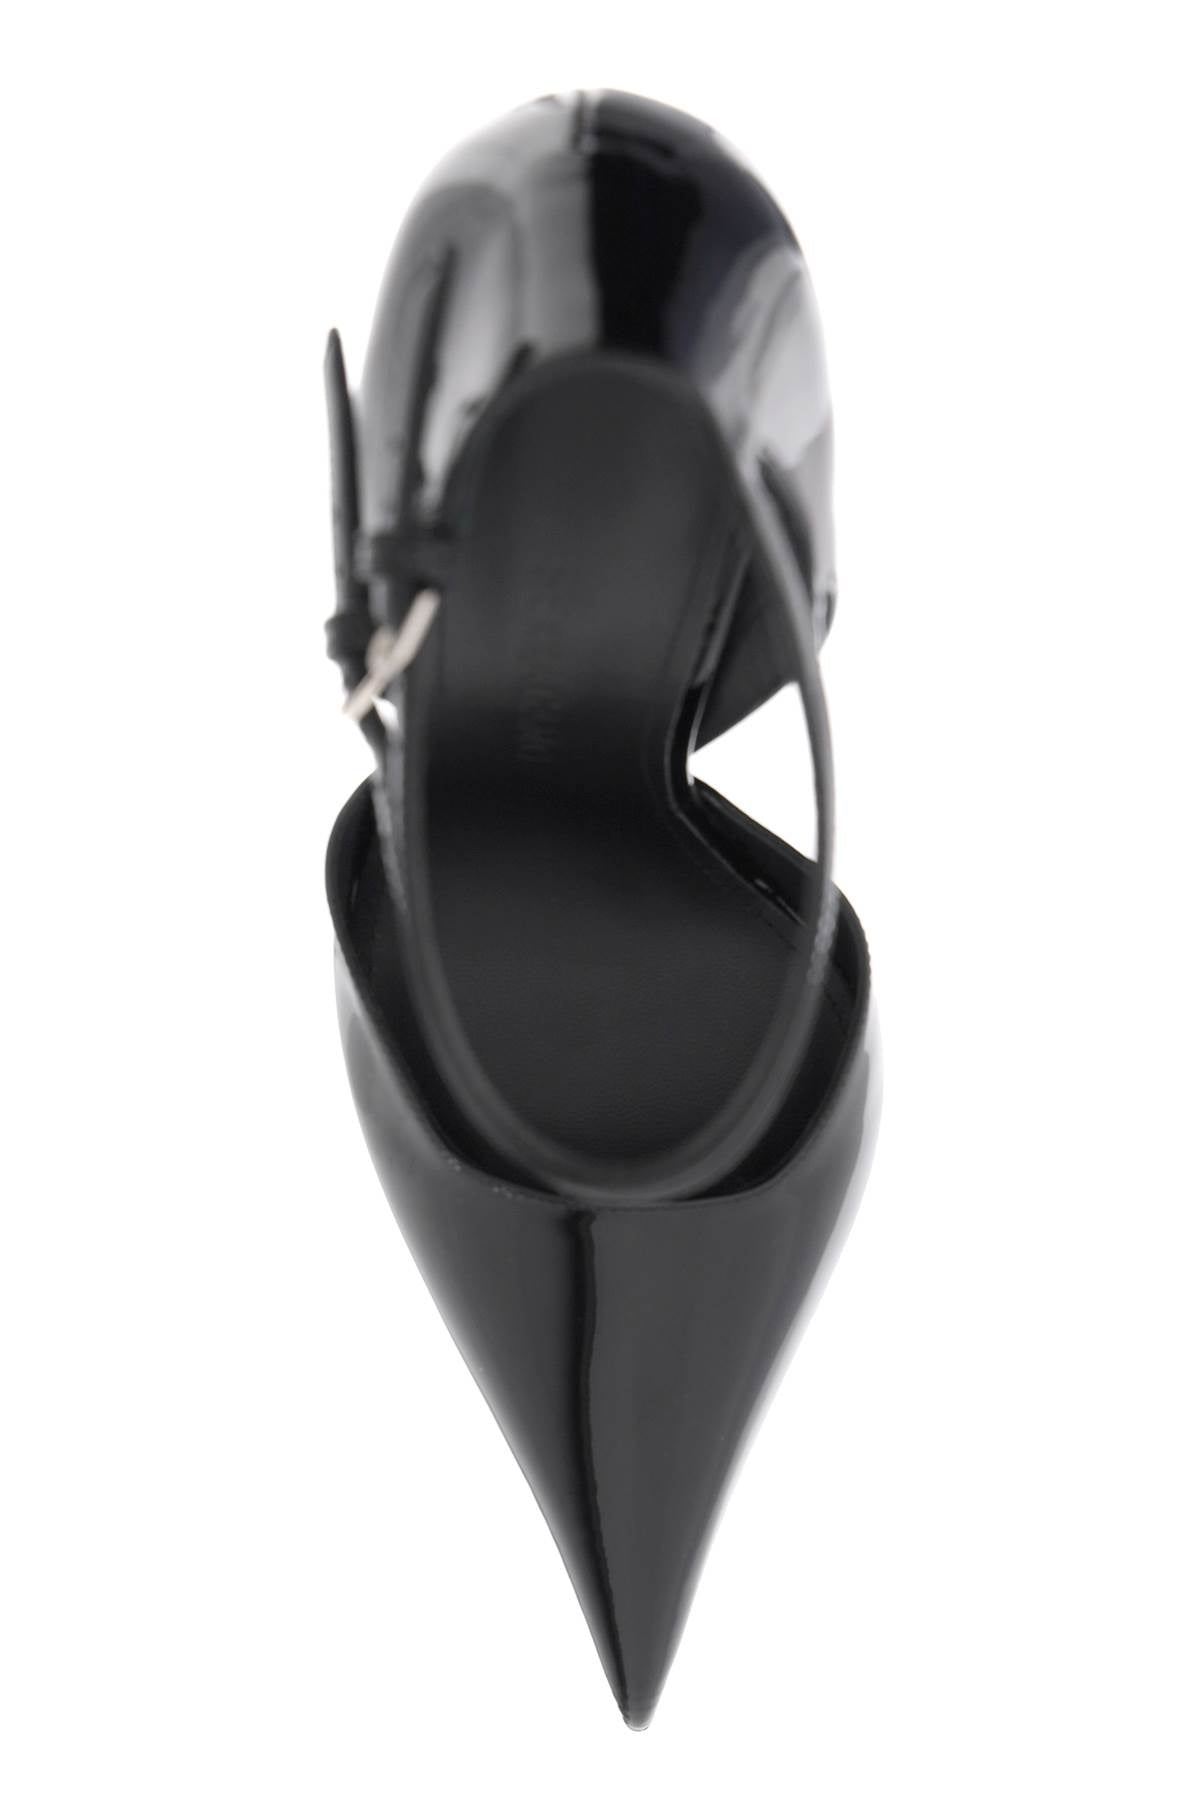 FERRAGAMO Sophisticated Black Patent Leather Sandals for Women with Adjustable Straps and Contoured Heels